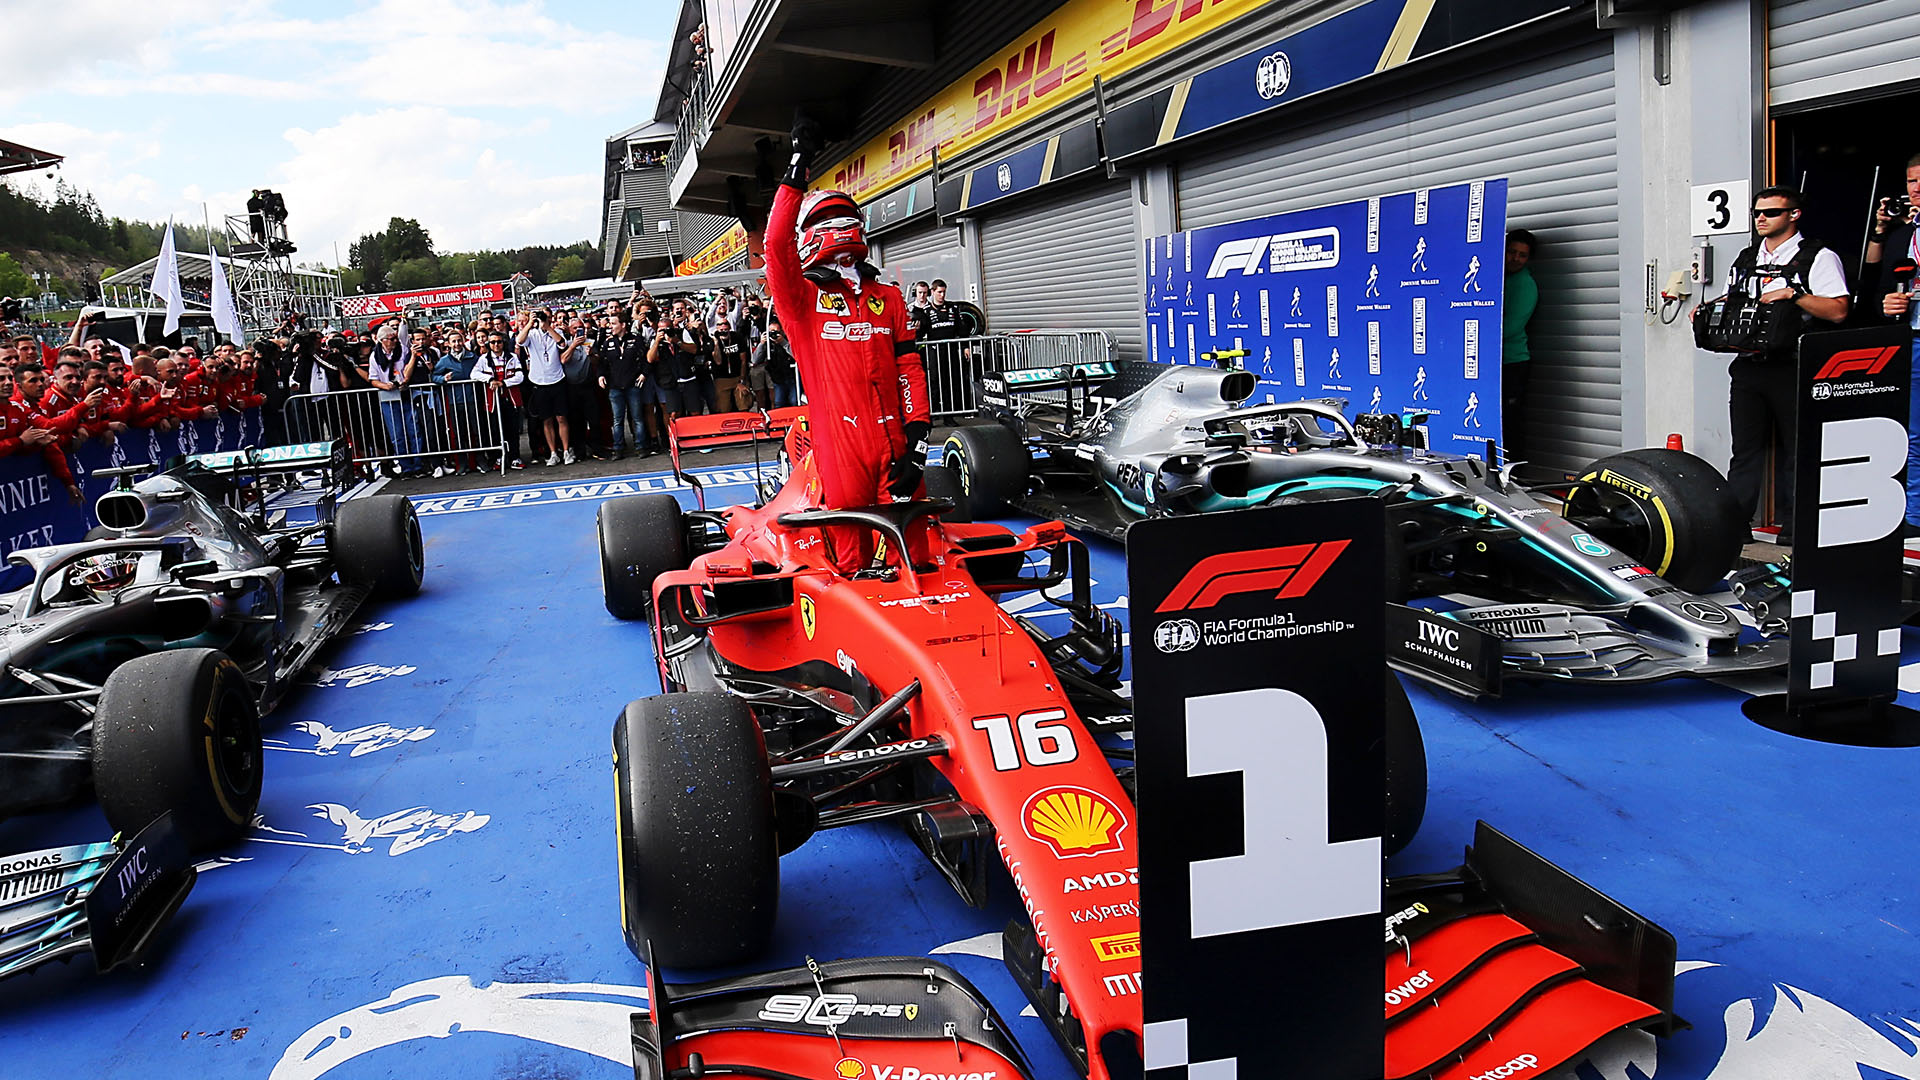 Belgian Grand Prix 2019 F1 race report Leclerc holds off Hamilton to take maiden Grand Prix victory